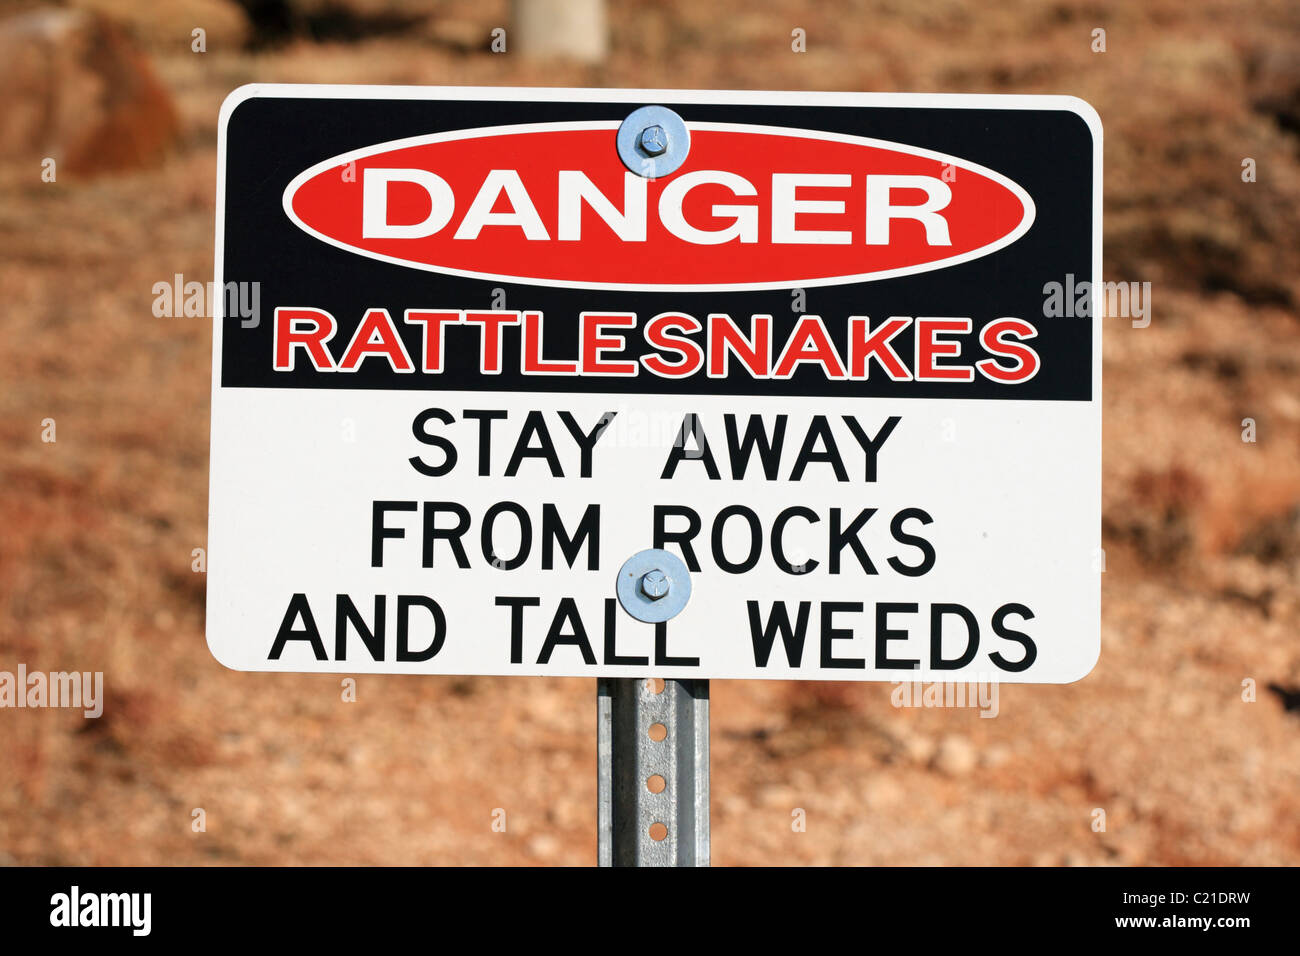 red white and black danger rattlesnakes sign on a post Stock Photo